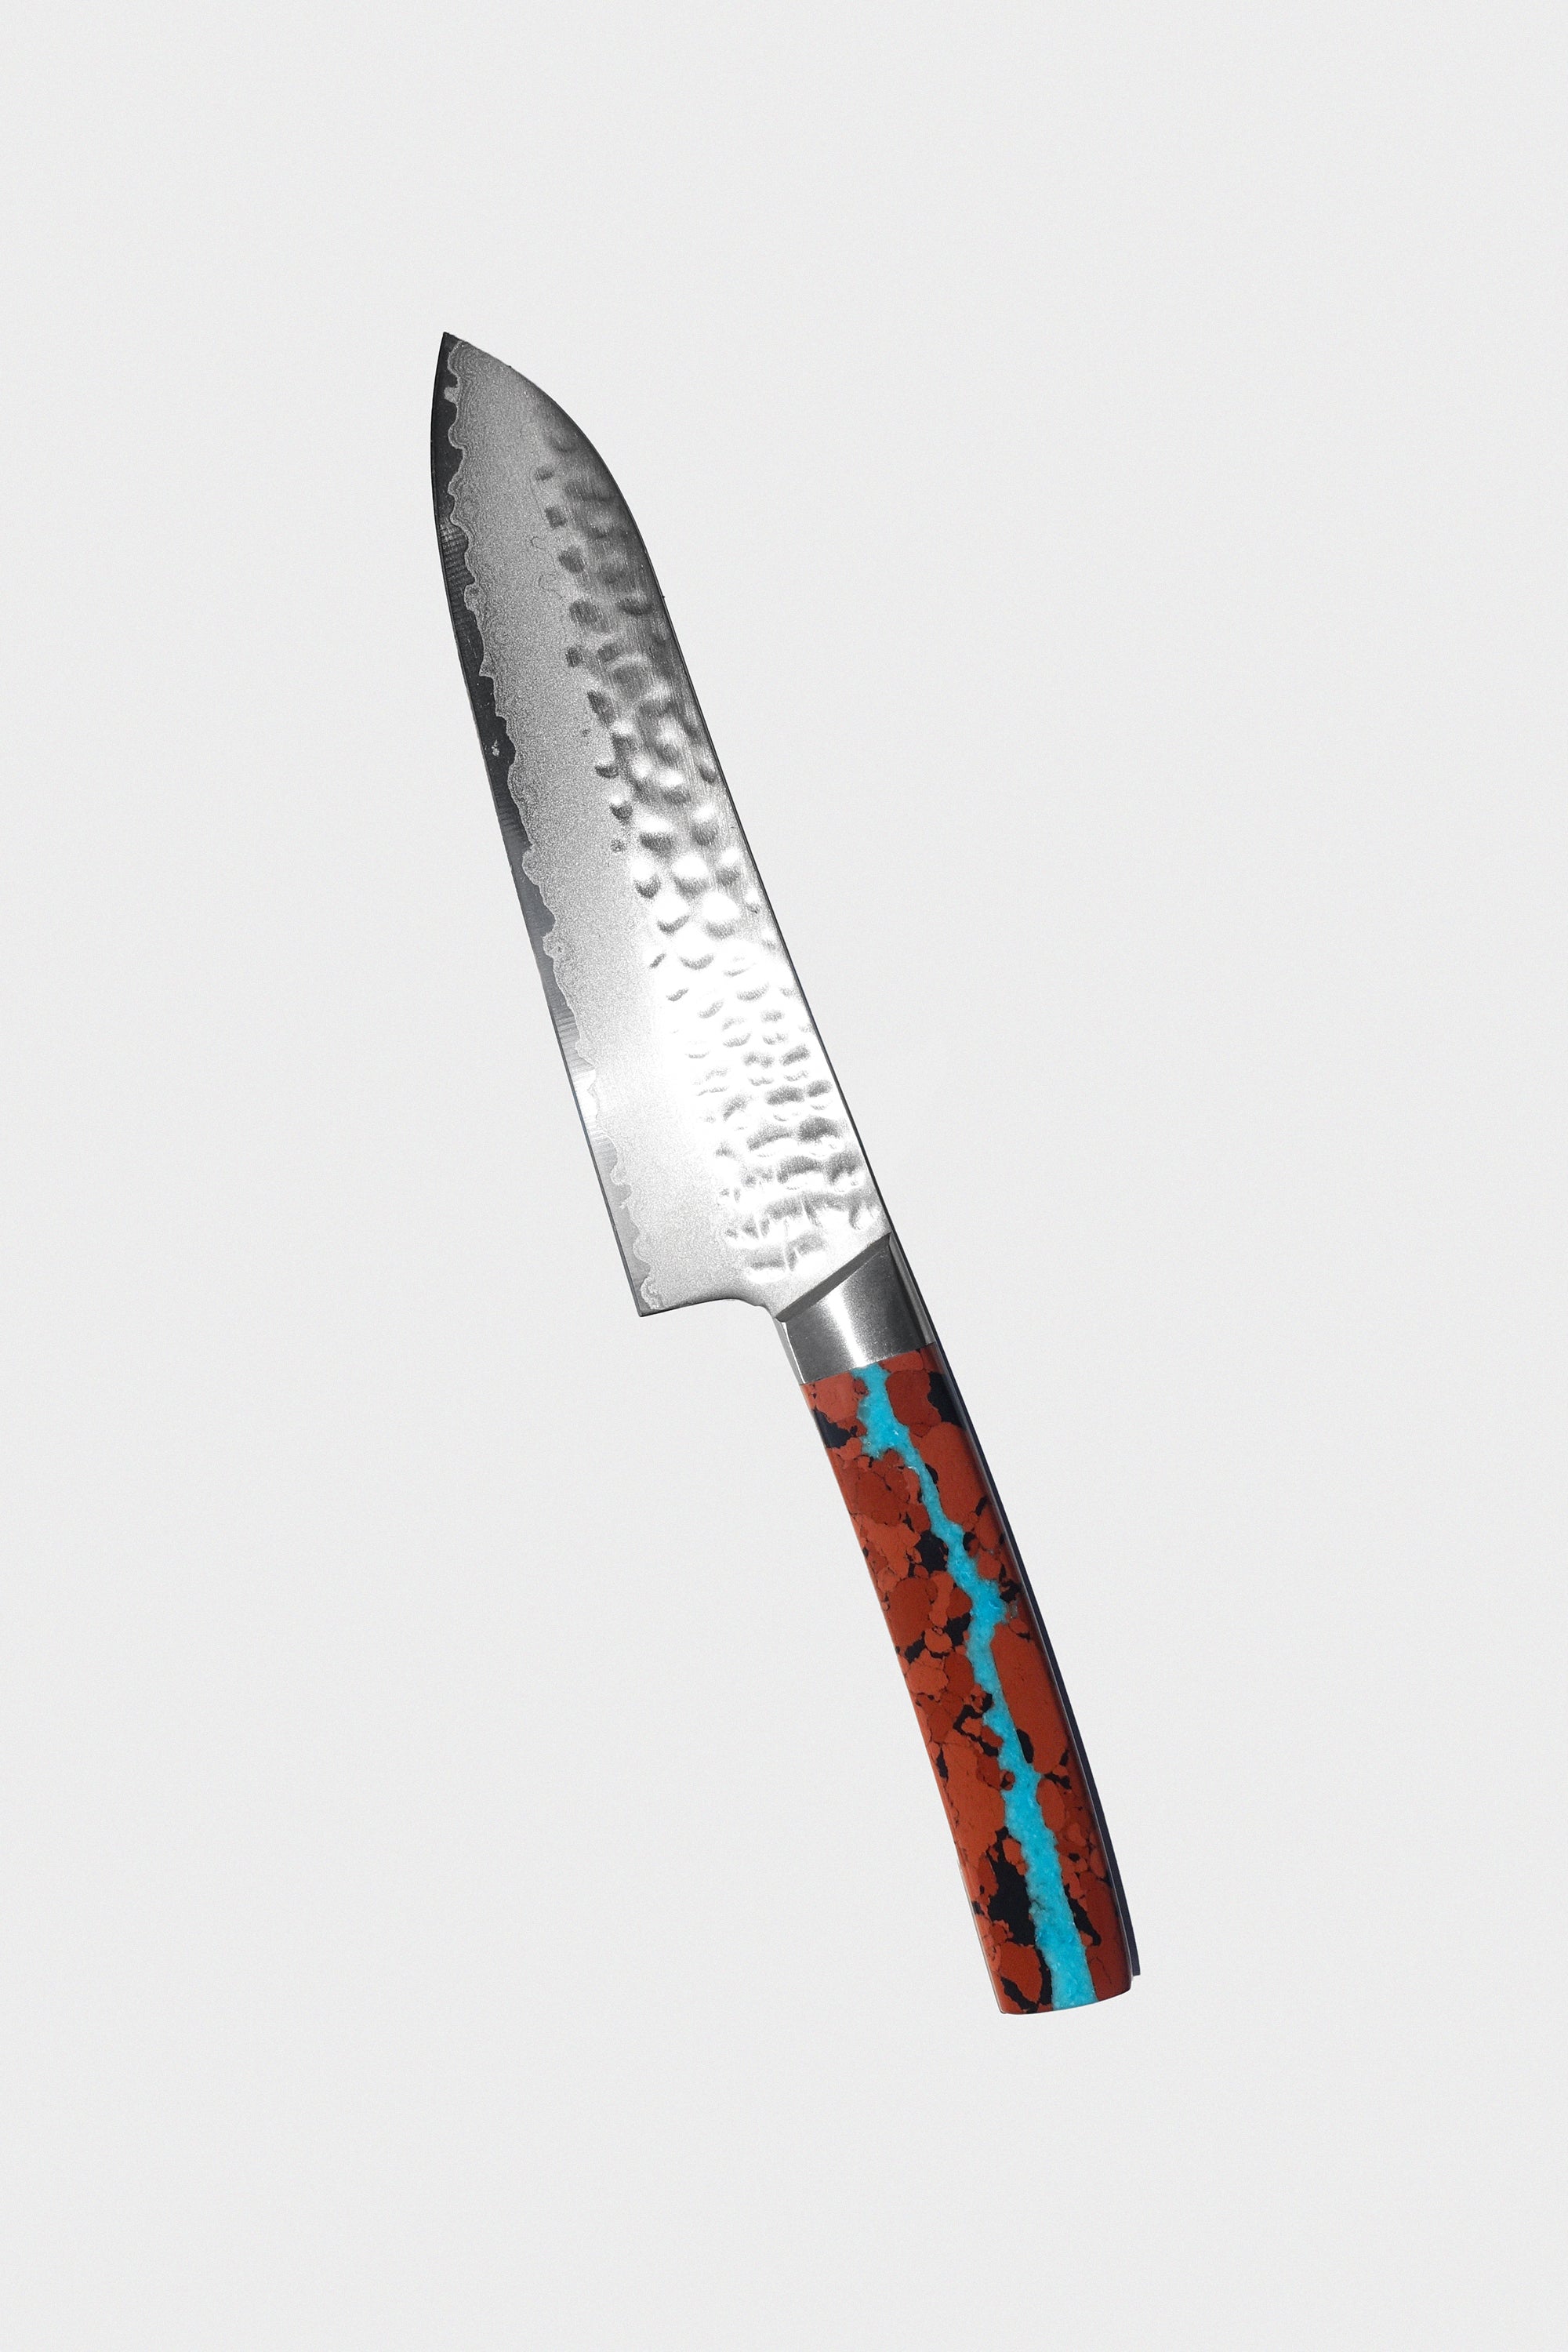 5" Santoku Knife in Vein Turquoise: Double-Sided